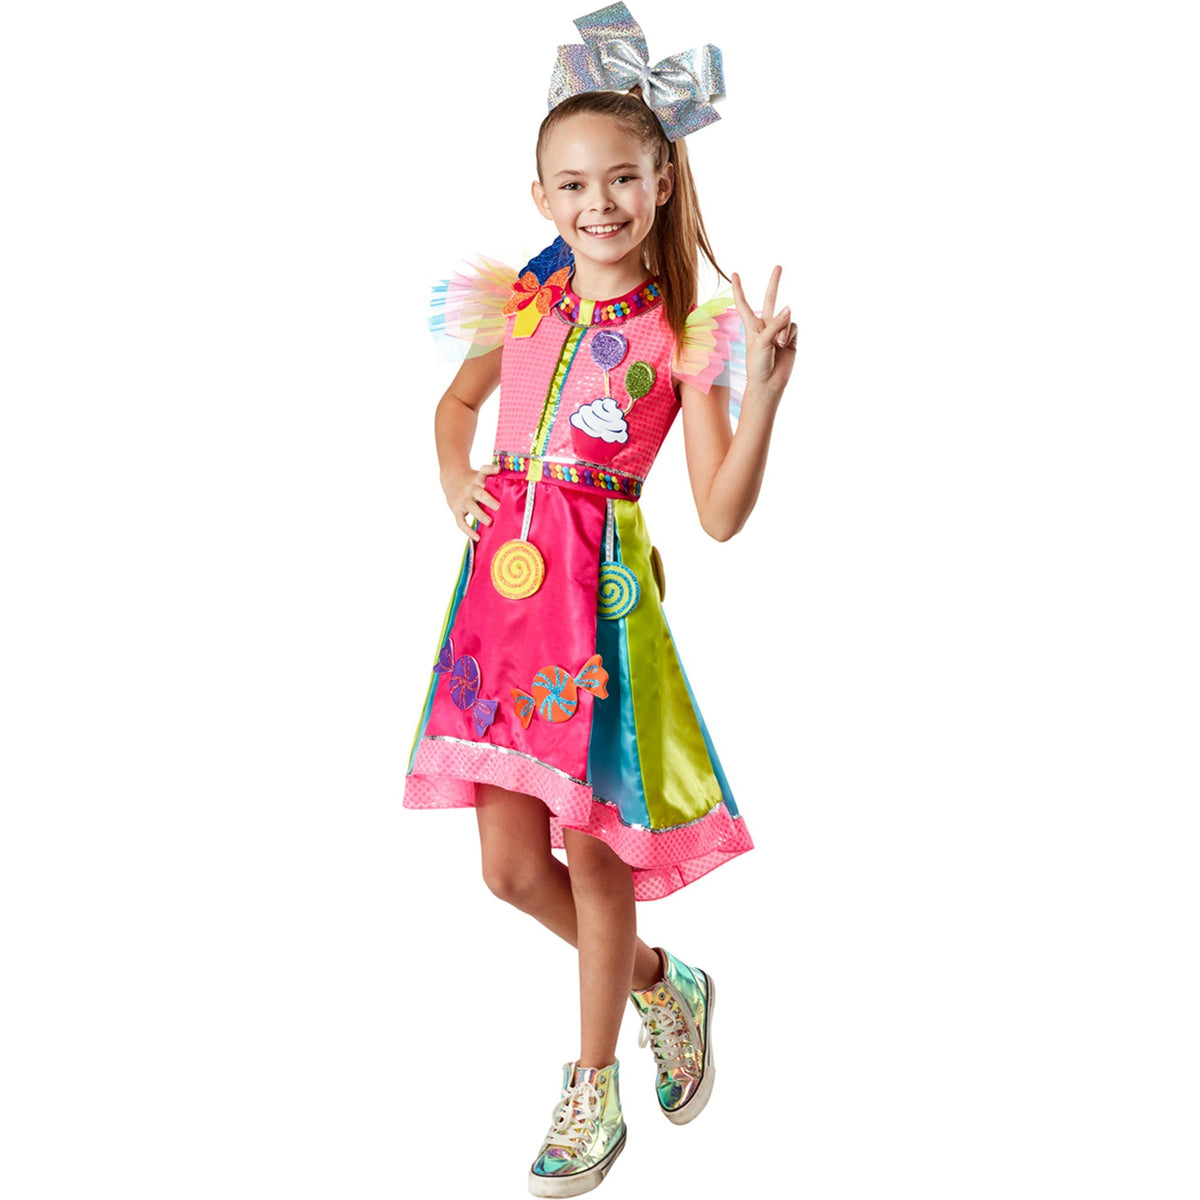 RUBIES II (Ruby Slipper Sales) Costumes Jojo Siwa Costume for Kids, Multicolor Dress with candies